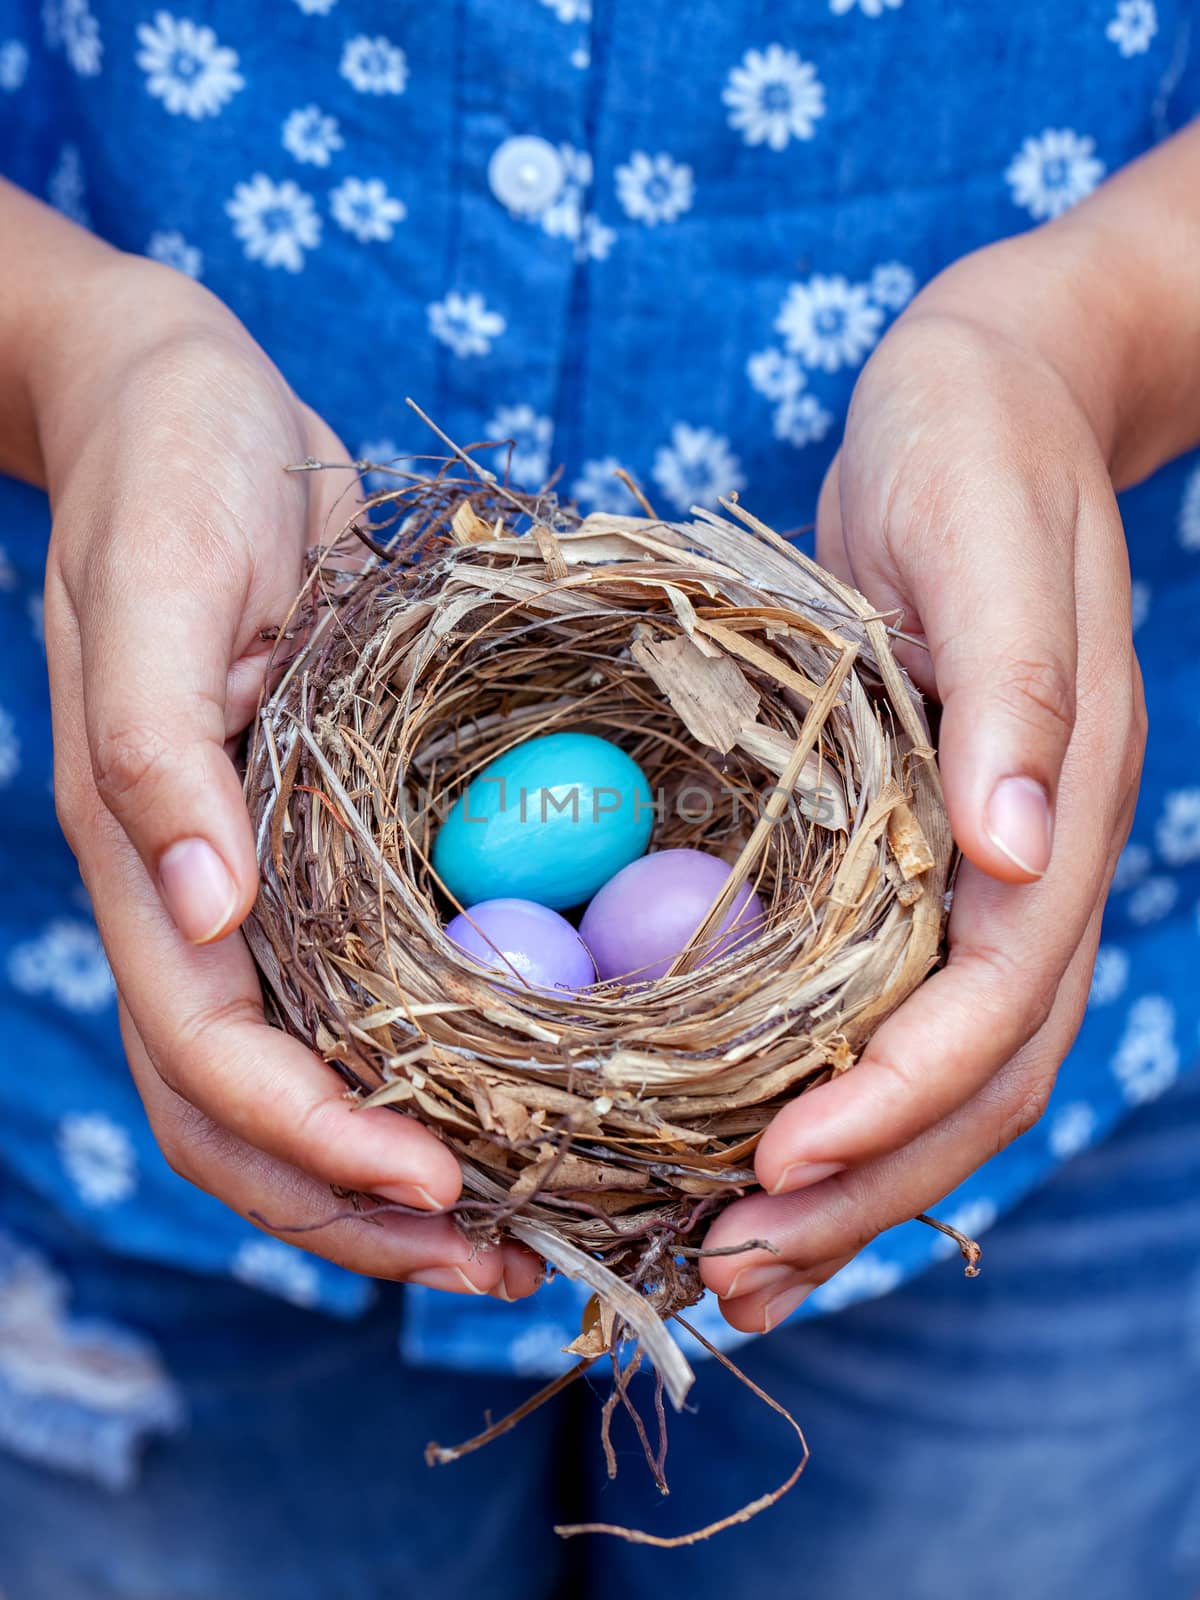 Nest with Colorful eggs in woman's hands.